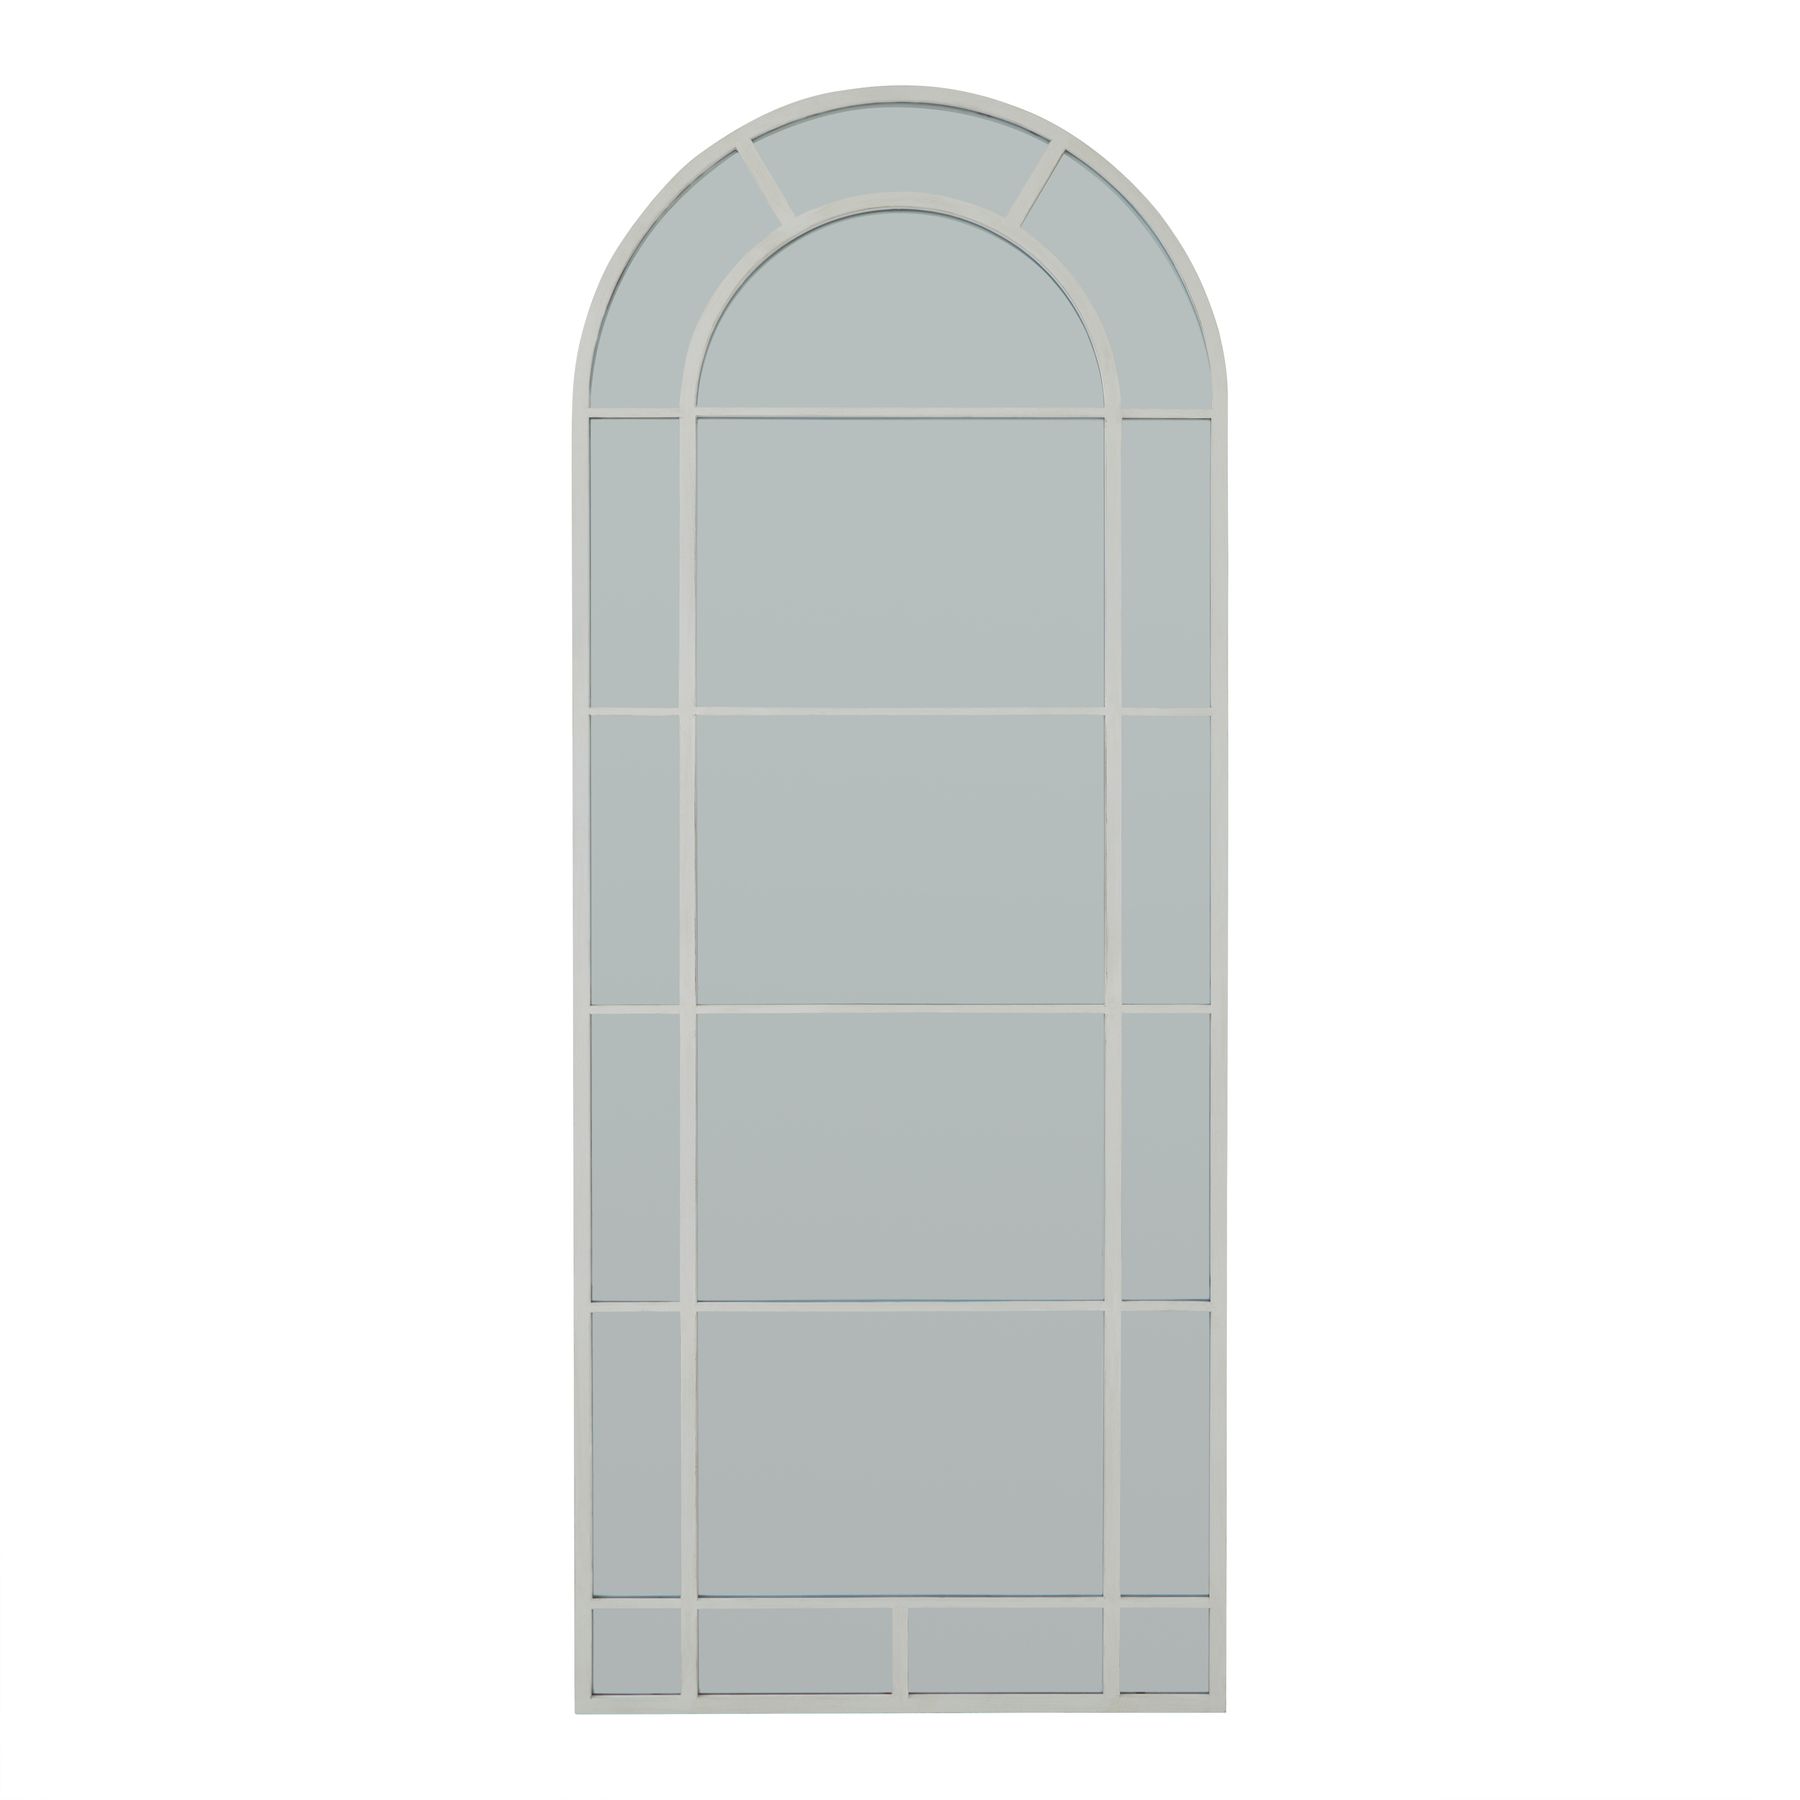 White Large Arched Window Mirror - Image 1